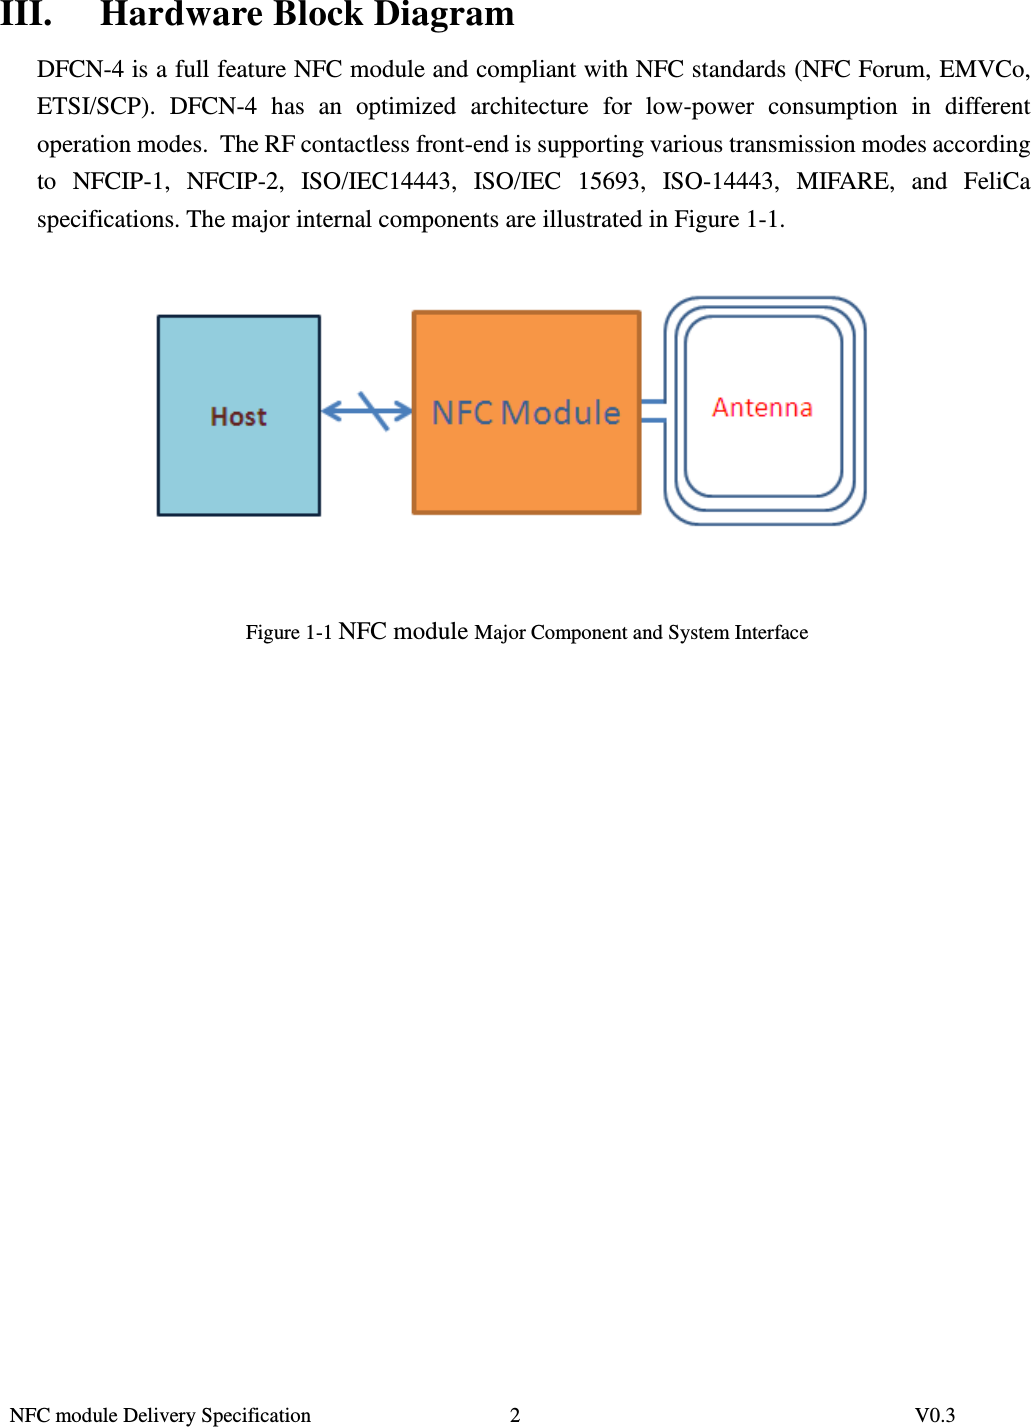  NFC module Delivery Specification          V0.3 2 III. Hardware Block Diagram DFCN-4 is a full feature NFC module and compliant with NFC standards (NFC Forum, EMVCo, ETSI/SCP).  DFCN-4  has  an  optimized  architecture  for  low-power  consumption  in  different operation modes.  The RF contactless front-end is supporting various transmission modes according to  NFCIP-1,  NFCIP-2,  ISO/IEC14443,  ISO/IEC  15693,  ISO-14443,  MIFARE,  and  FeliCa specifications. The major internal components are illustrated in Figure 1-1.  Figure 1-1 NFC module Major Component and System Interface     